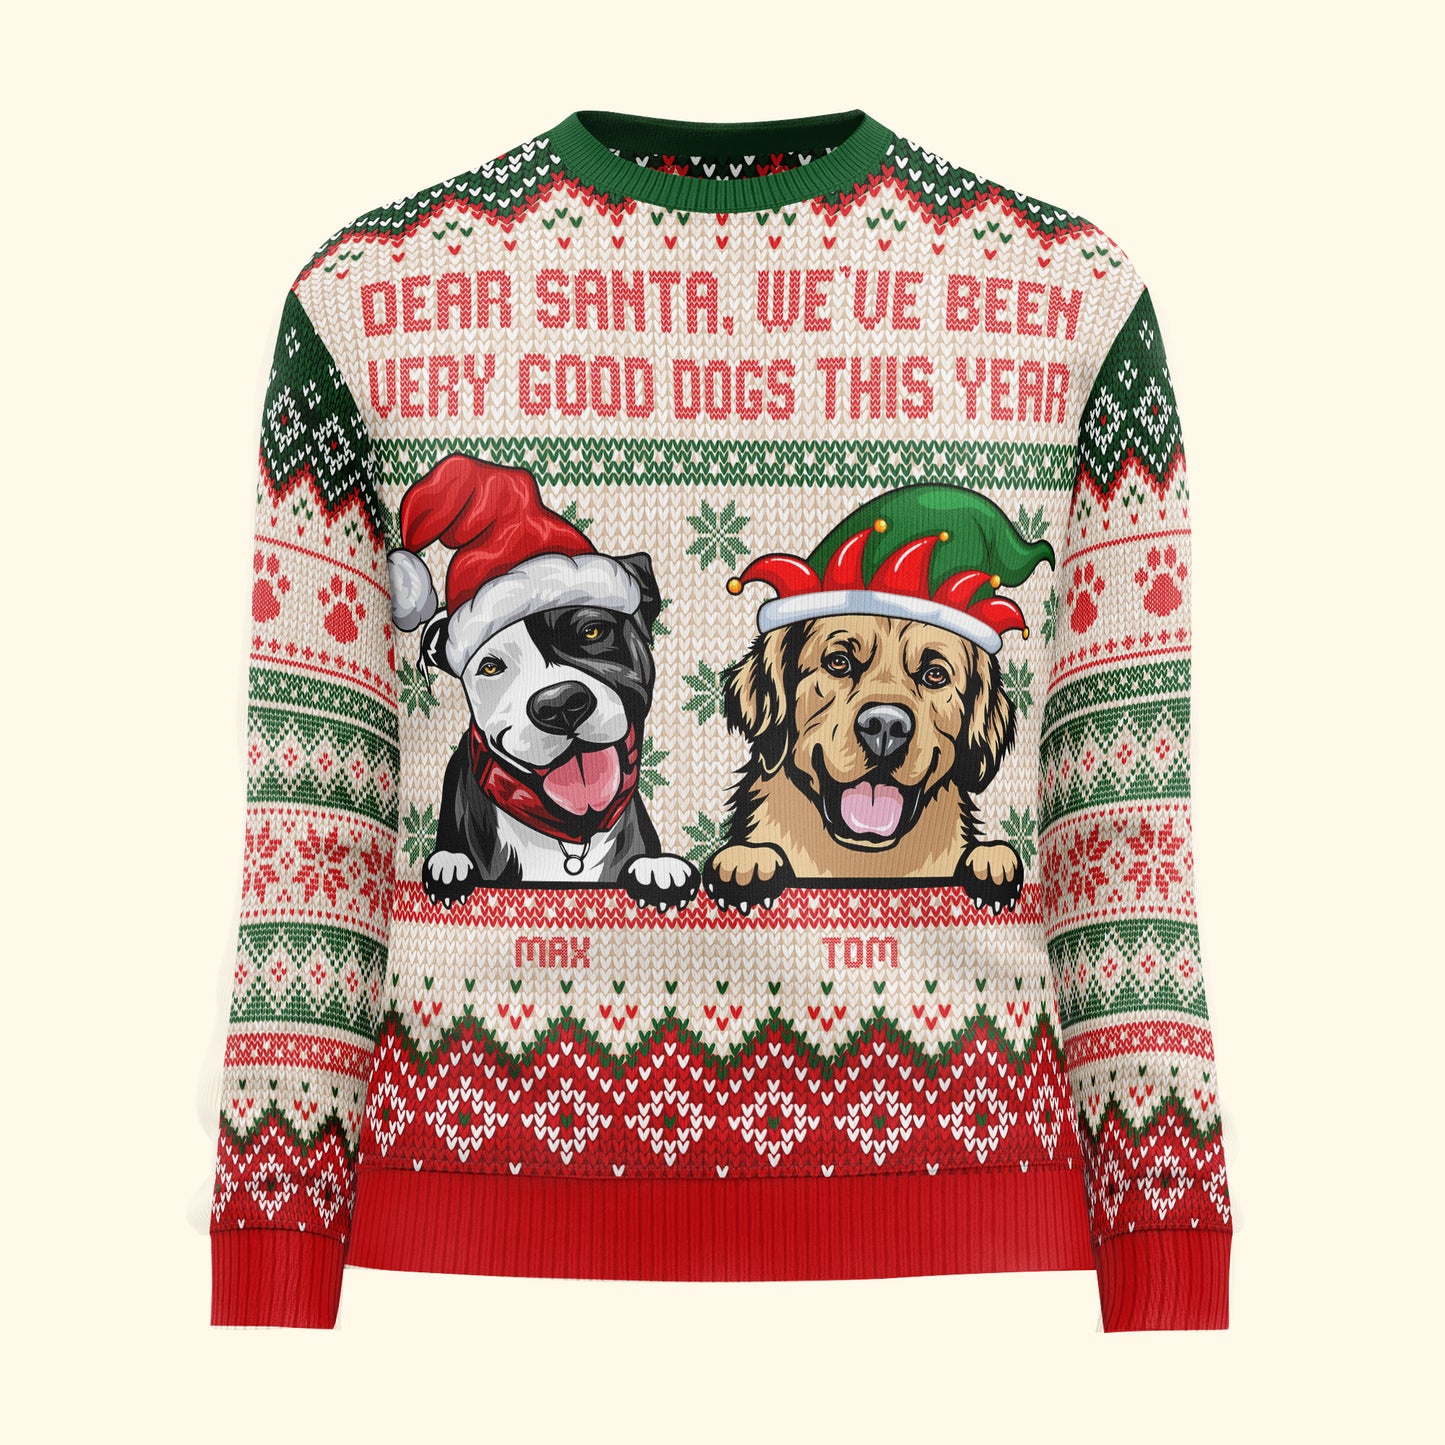 Dear Santa, We've Been Very Good Pets This Year - Personalized Ugly Sweater